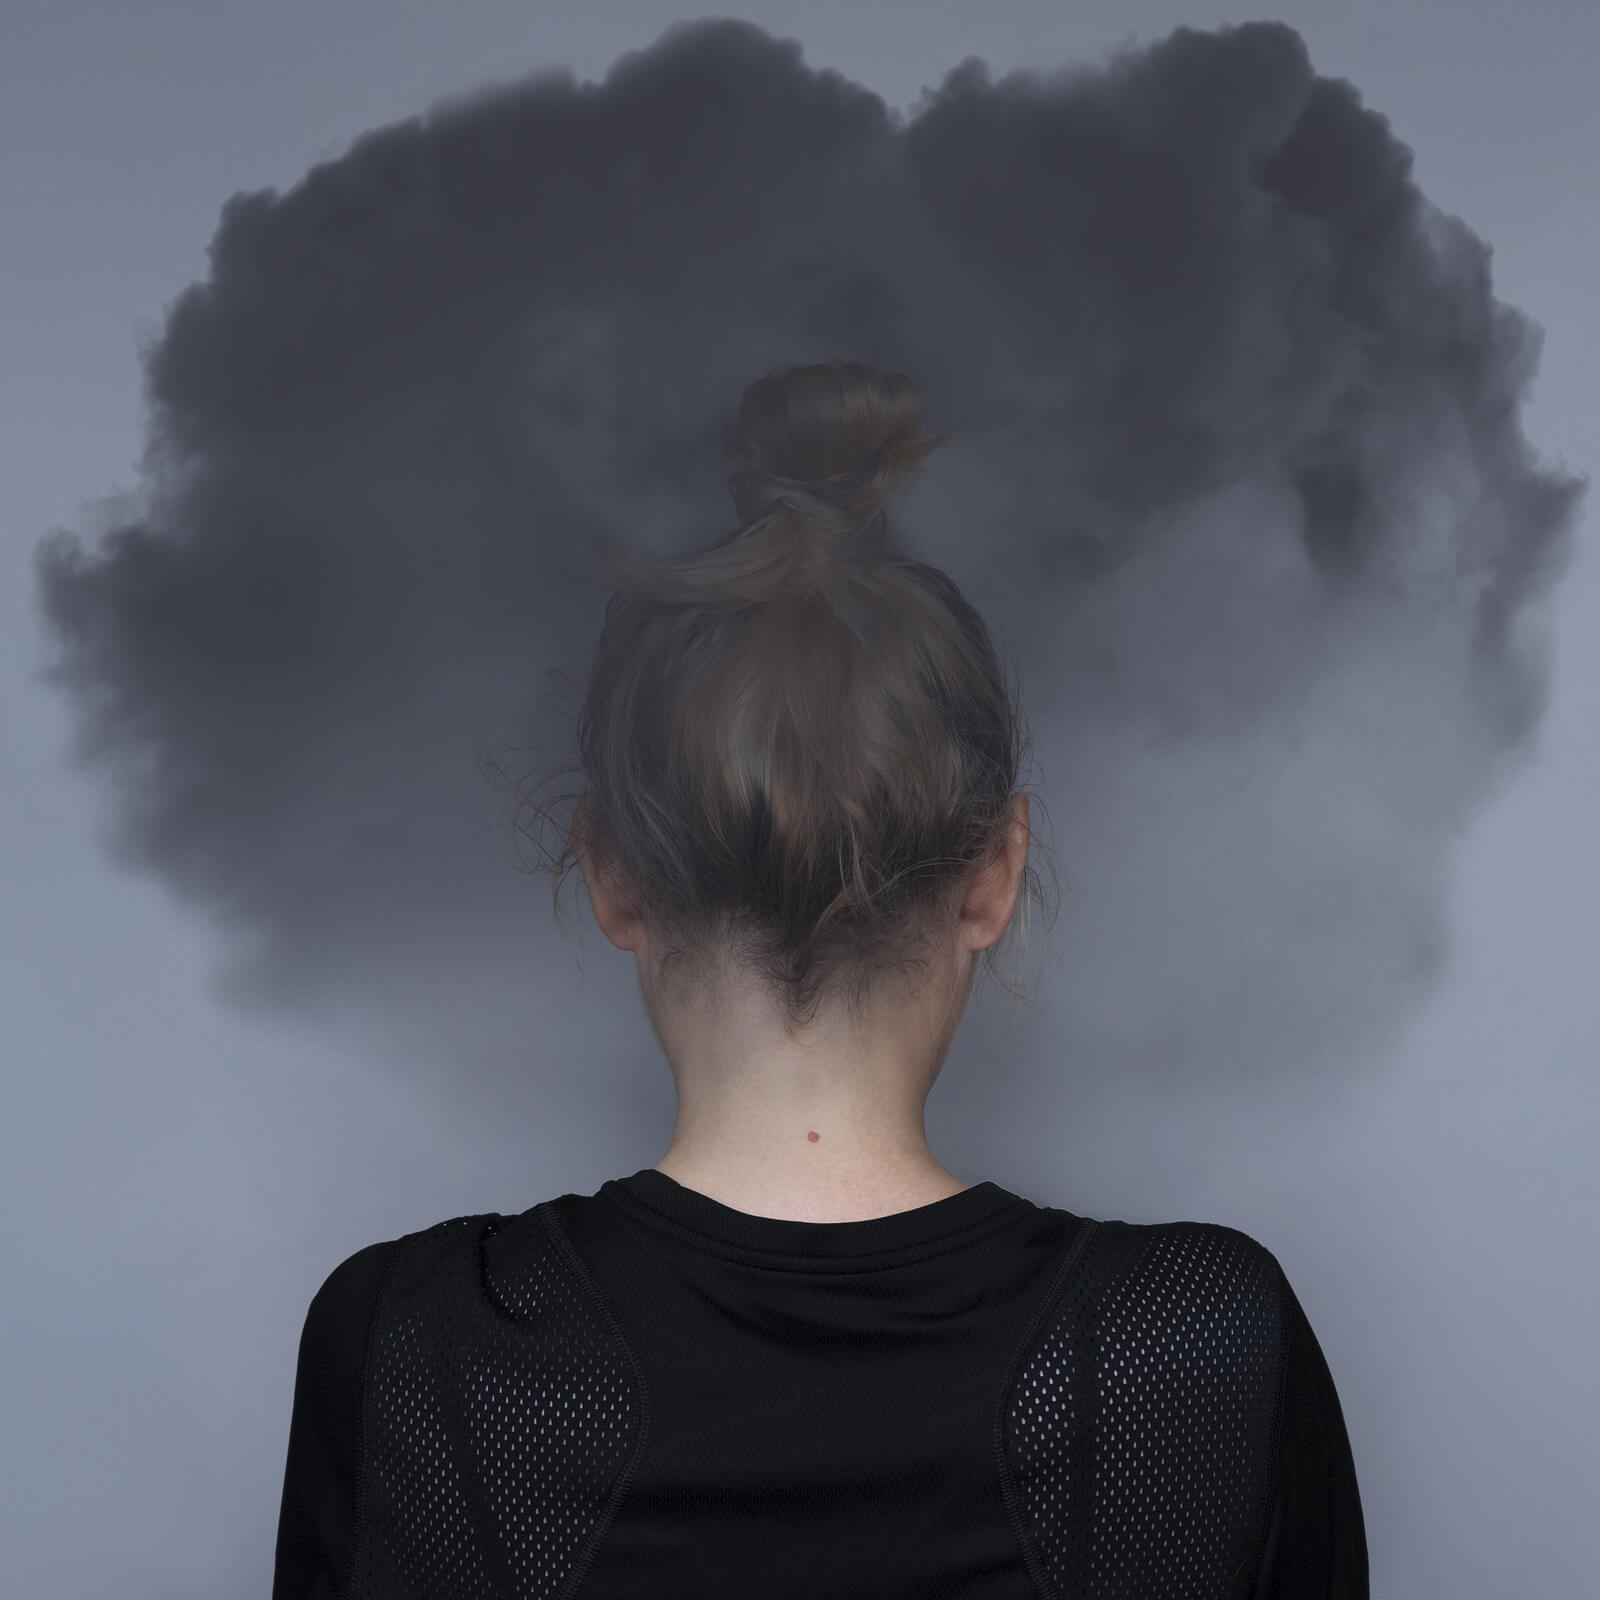 Image of the back of a woman's head surrounded by a black cloud. Are you trying to find "EMDR therapy near me" in Winter Park, FL? We have an EMDR therapist in the Orlando, FL area that can help you. Start addressing your negative memories. Call today!